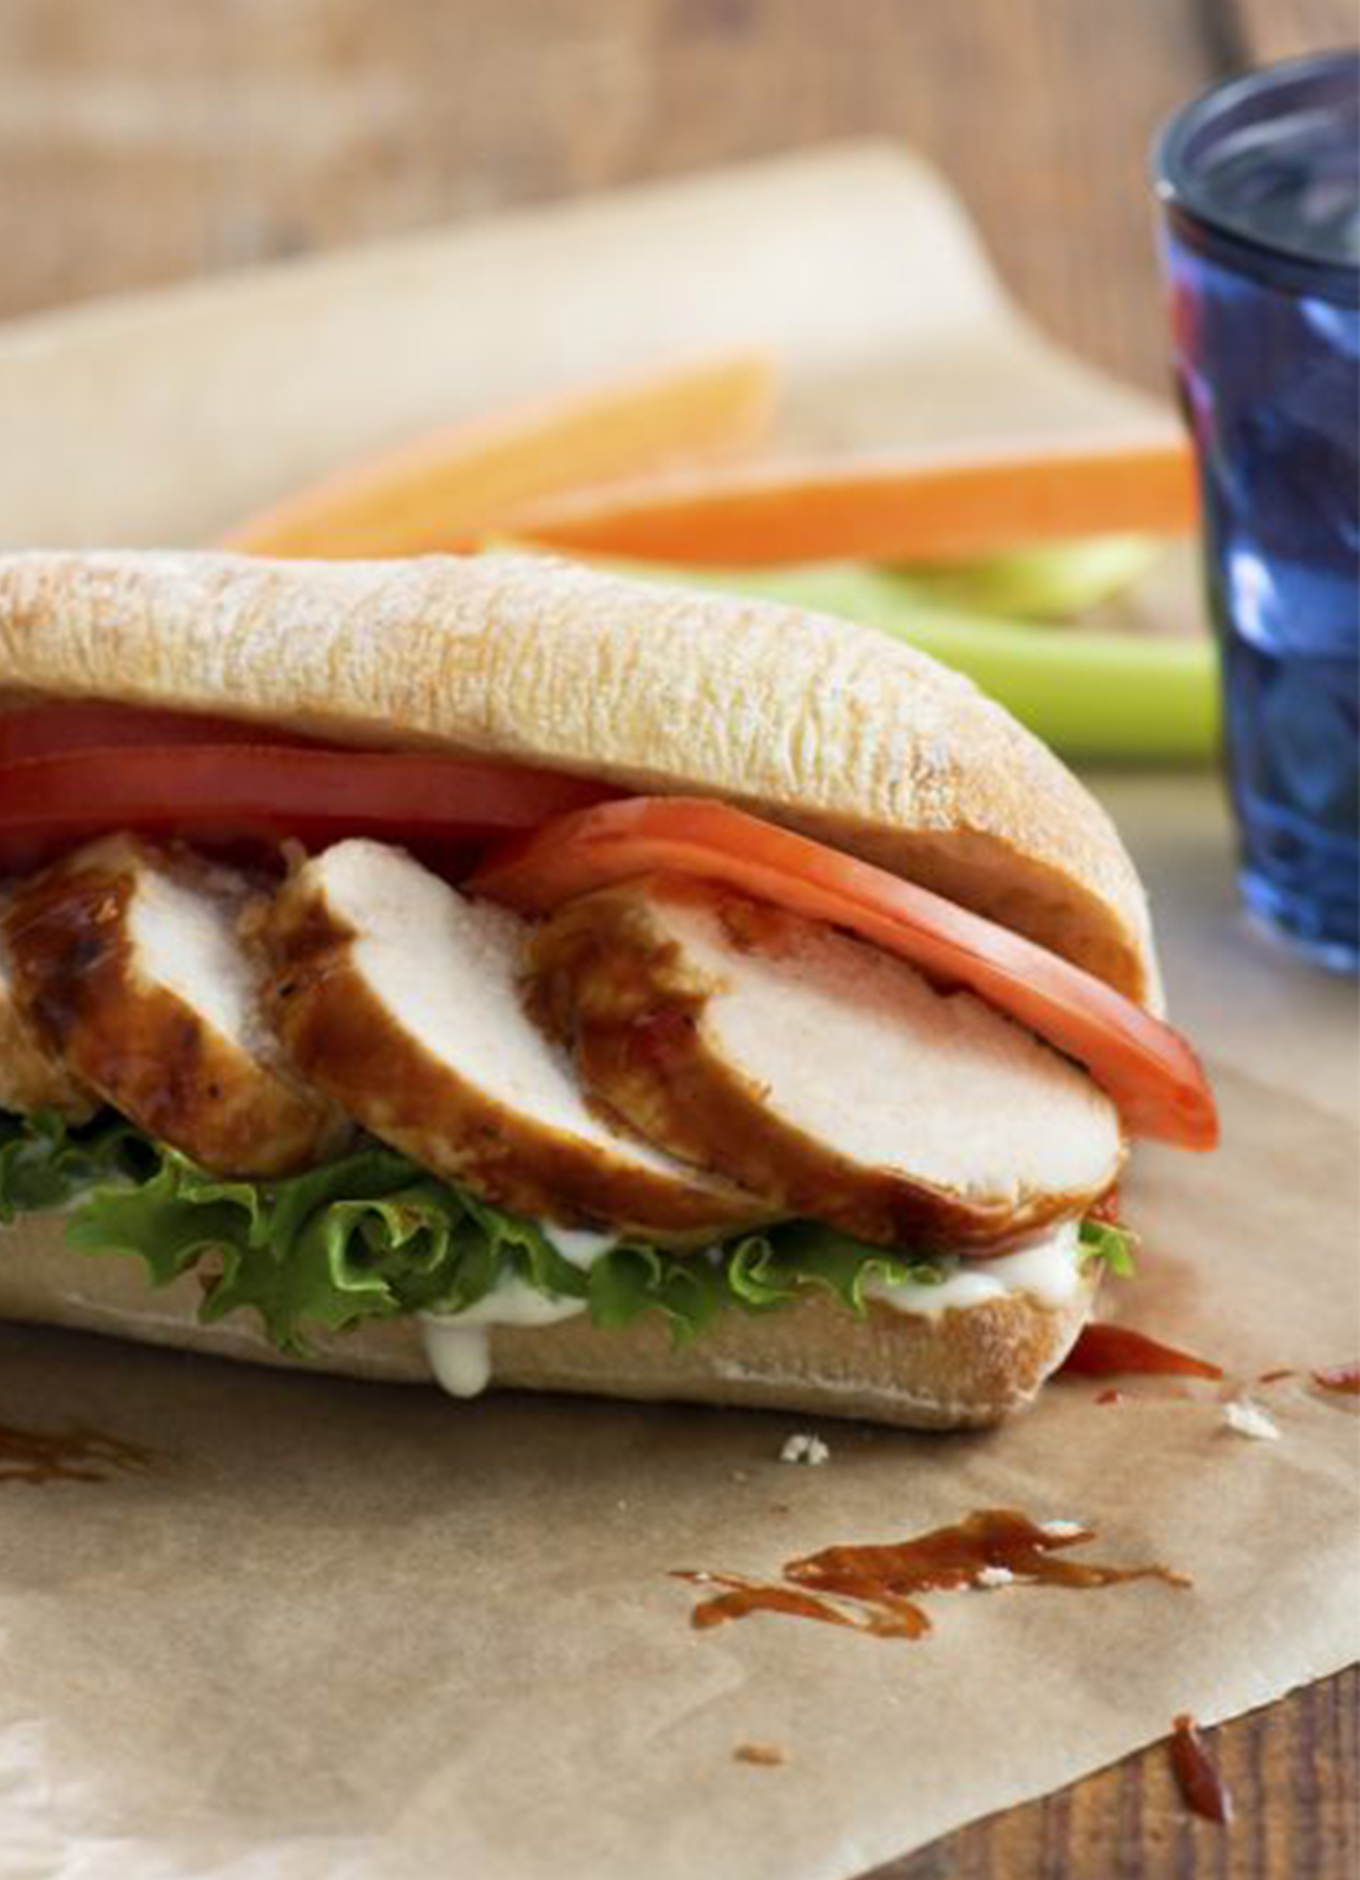 A fresh bun with generous slices of Grilled Buffalo Chicken with lettuce, tomato and sauce.